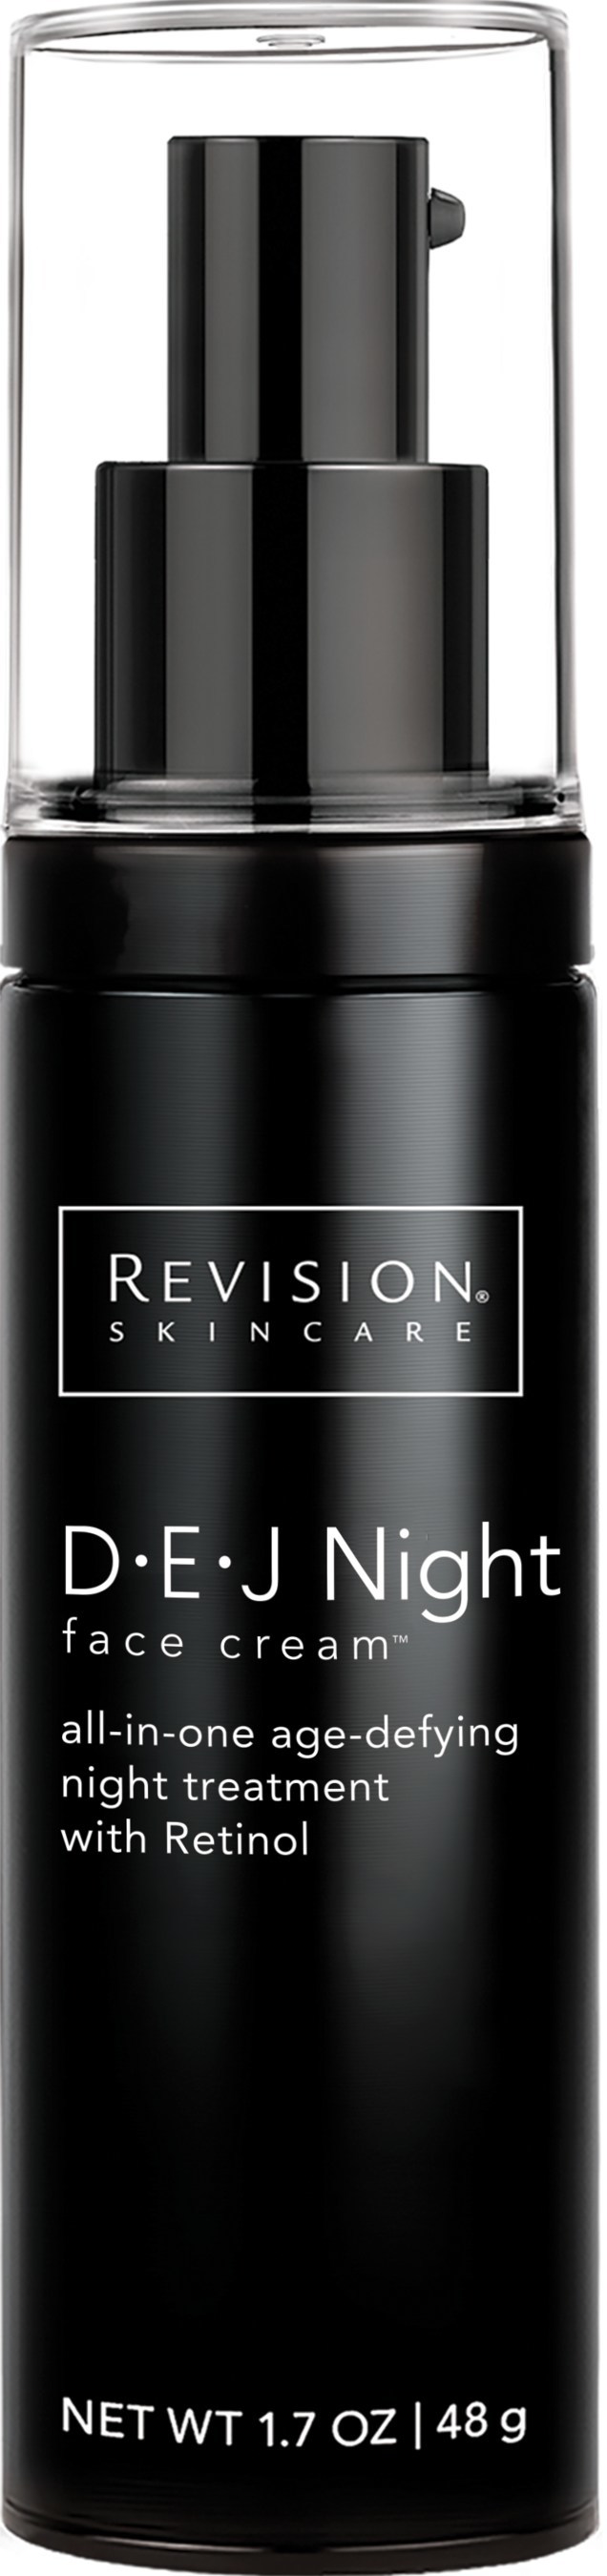 Revision Skincare® Launches a One-of-a-Kind, Intensive Nighttime